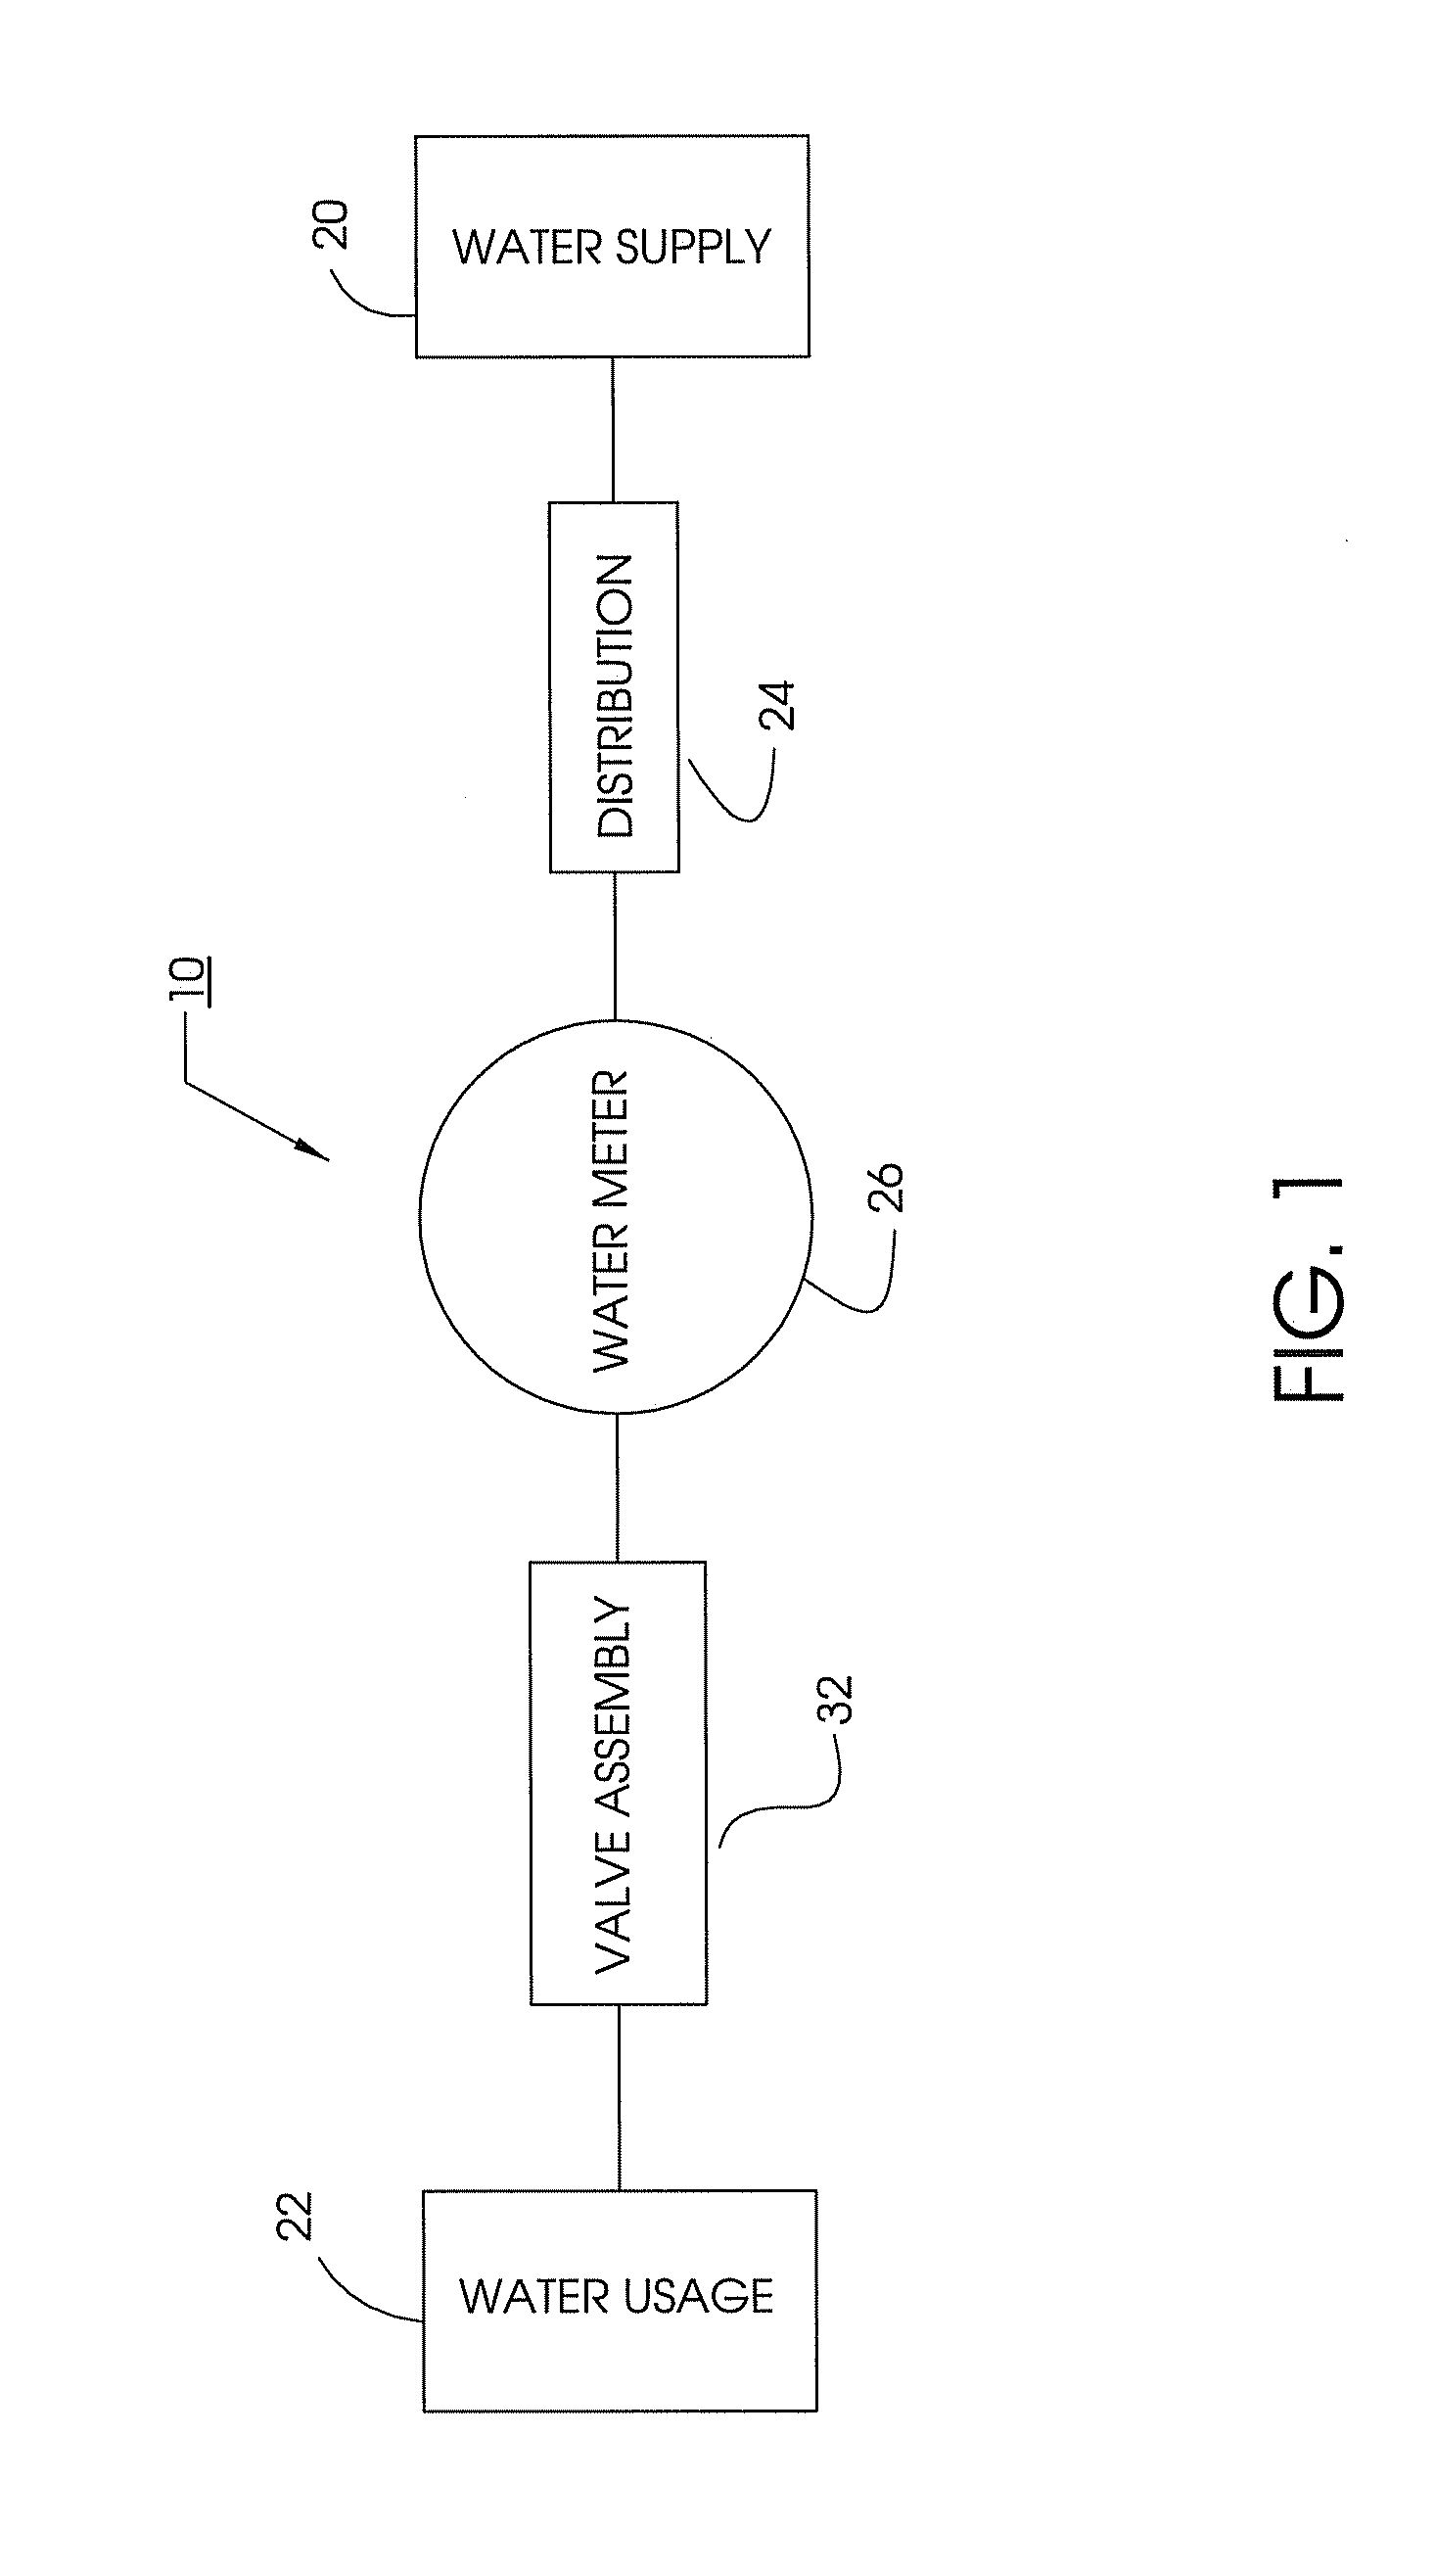 System for Increasing the Efficiency of a Water Meter